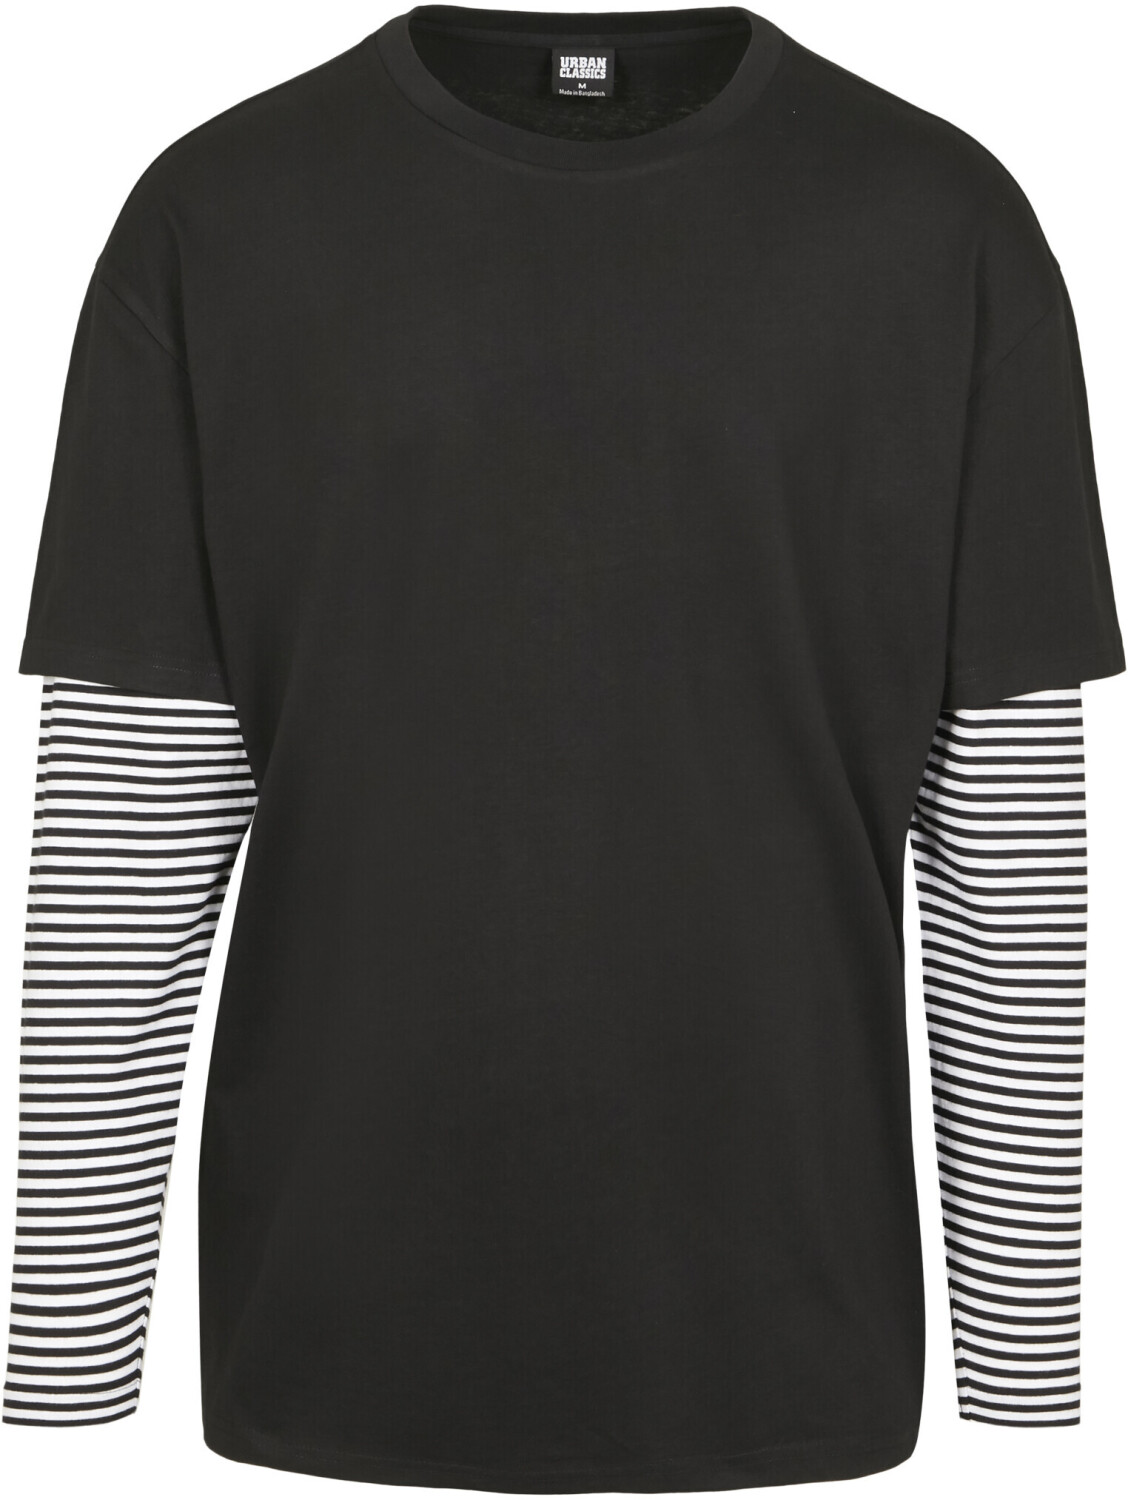 Buy Urban Classics Oversized £11.99 (TB3498) Double Striped Deals black Best LS Layer (Today) from – on Tee